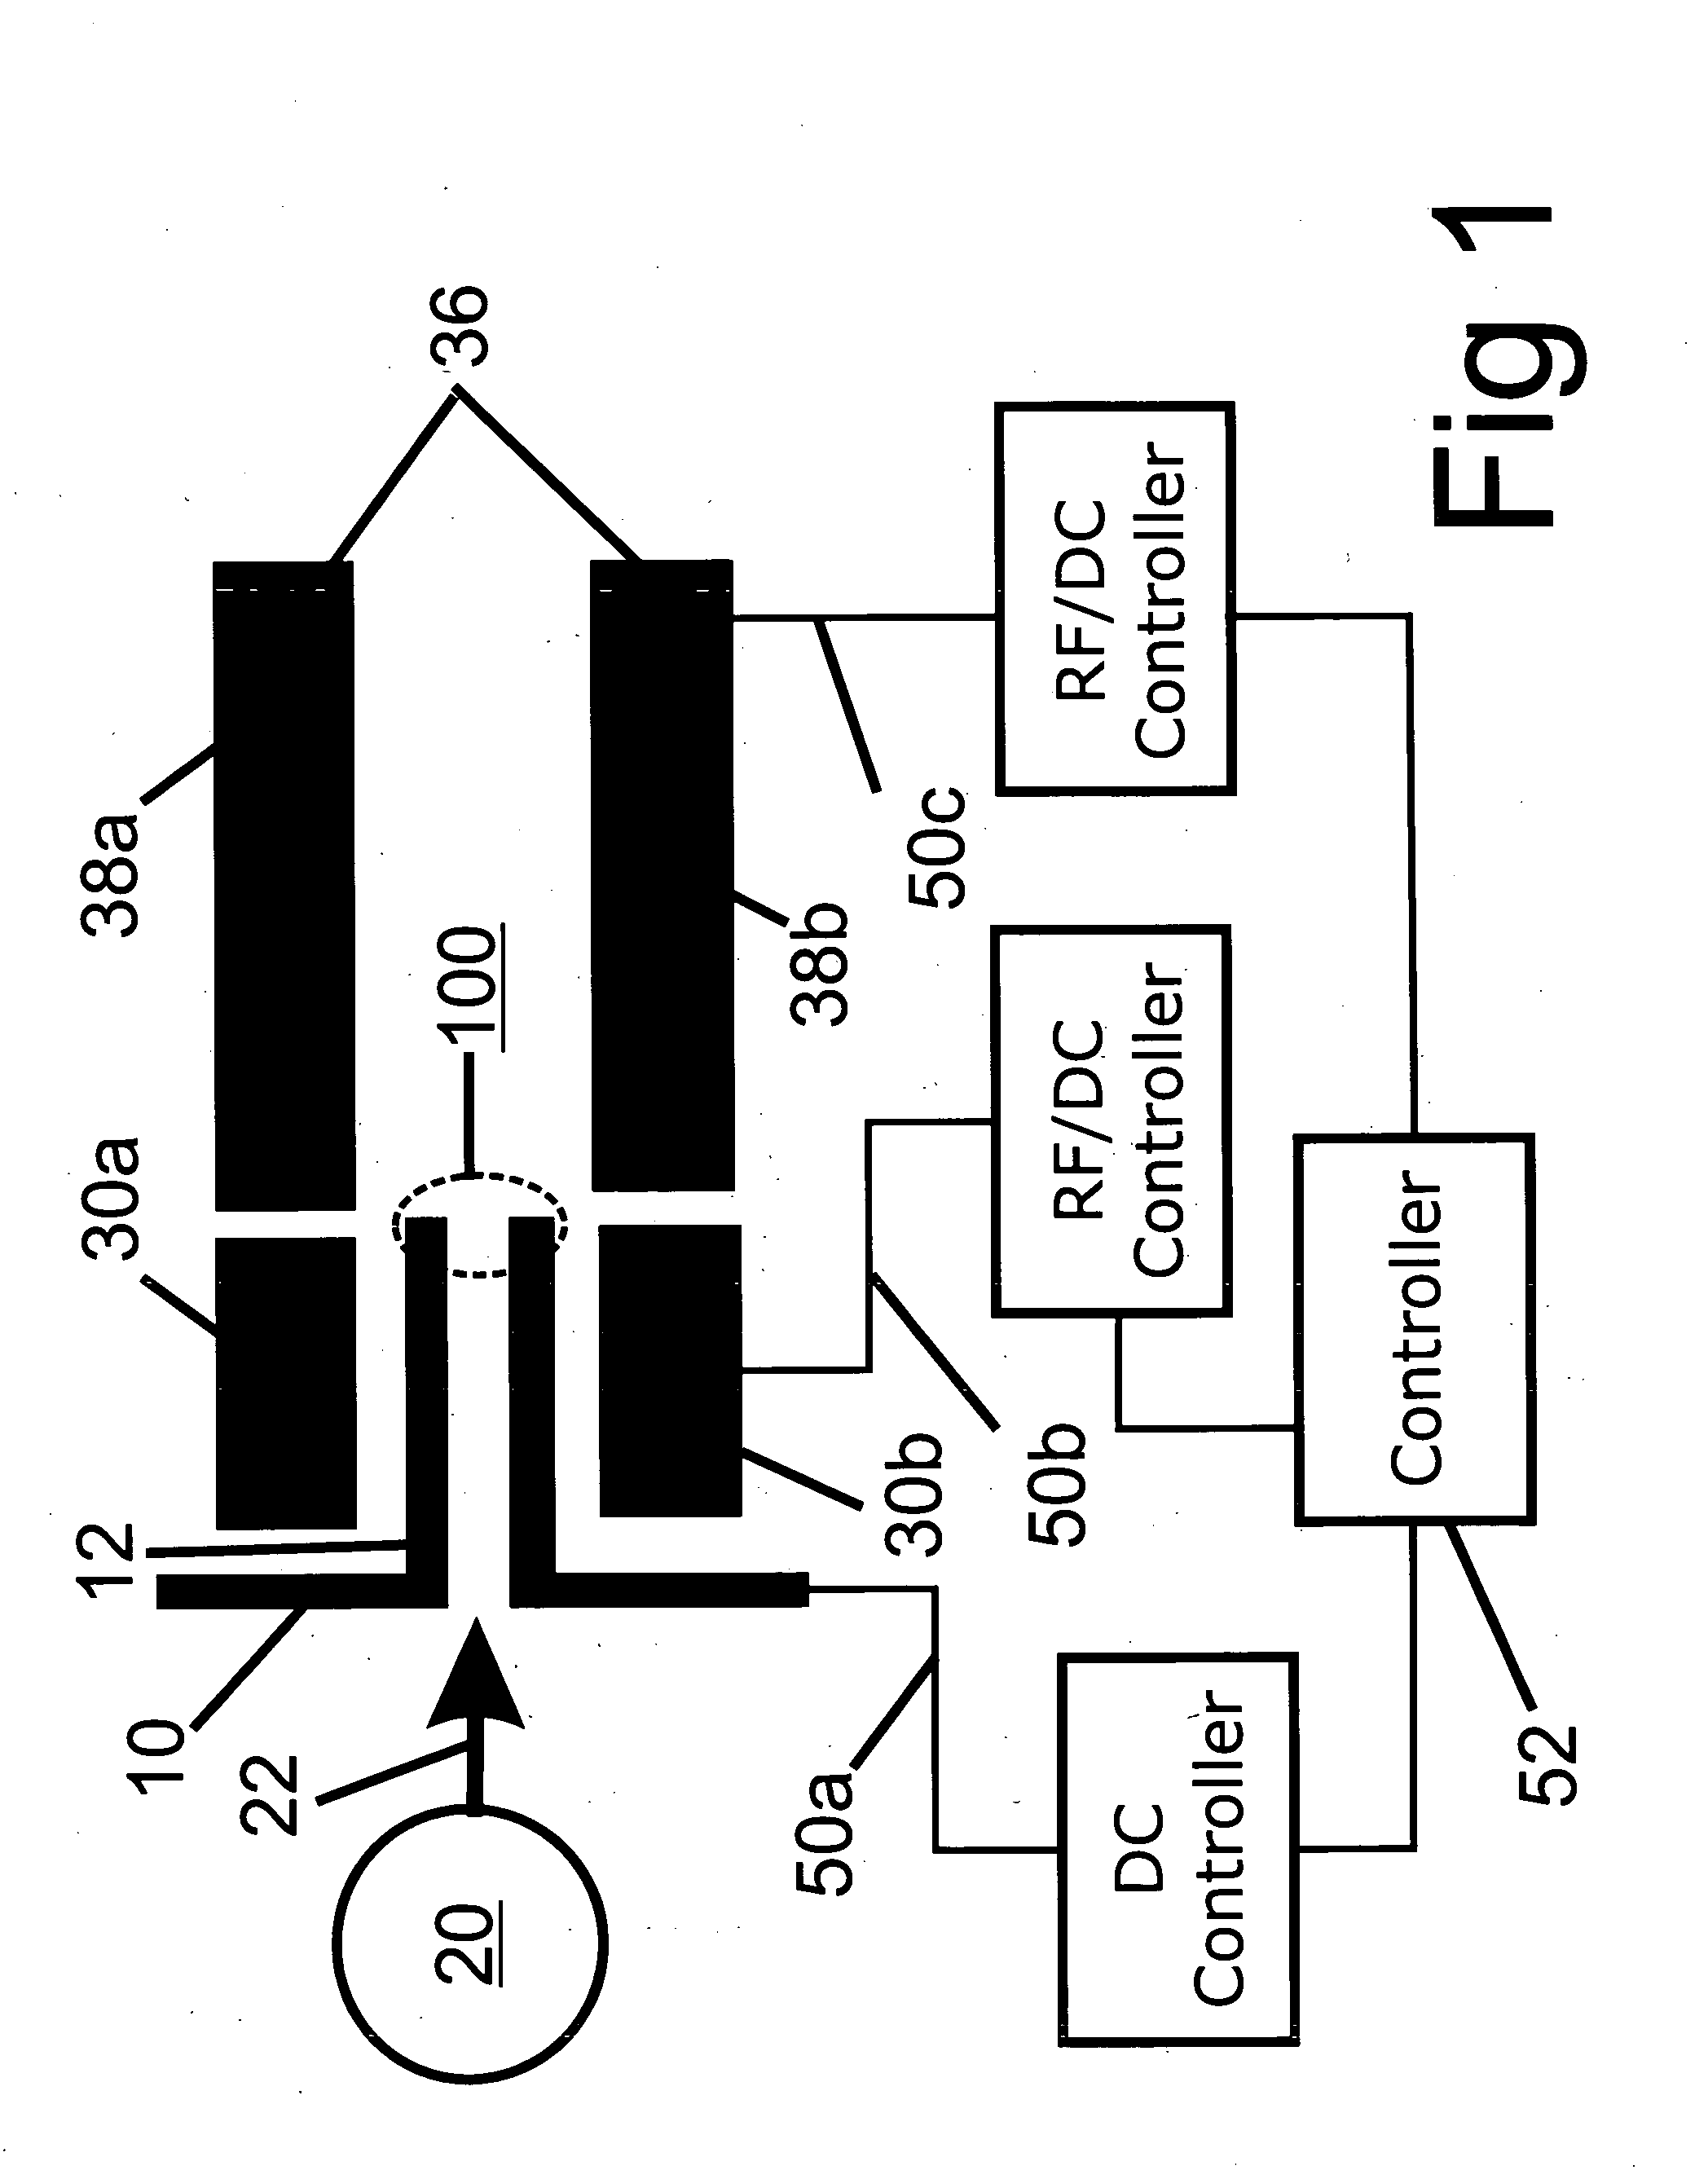 Radio Frequency lens for introducing ions into a quadrupole mass analyzer